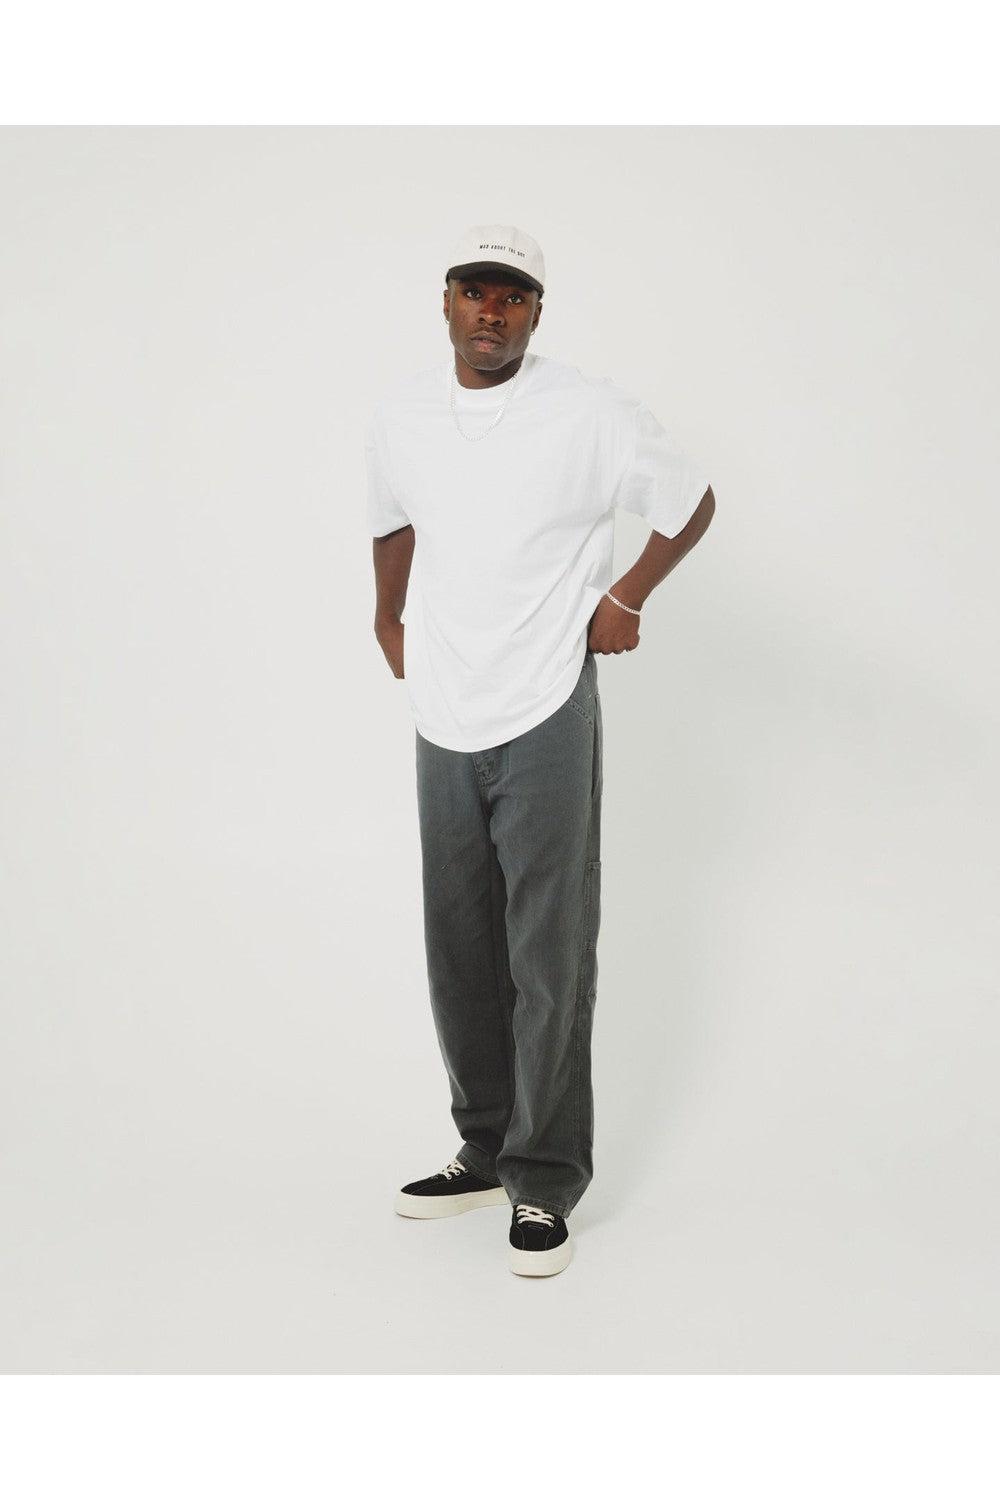 Commoners Mens Carpenter Pant - Vintage Grey | COMMONERS | Mad About The Boy